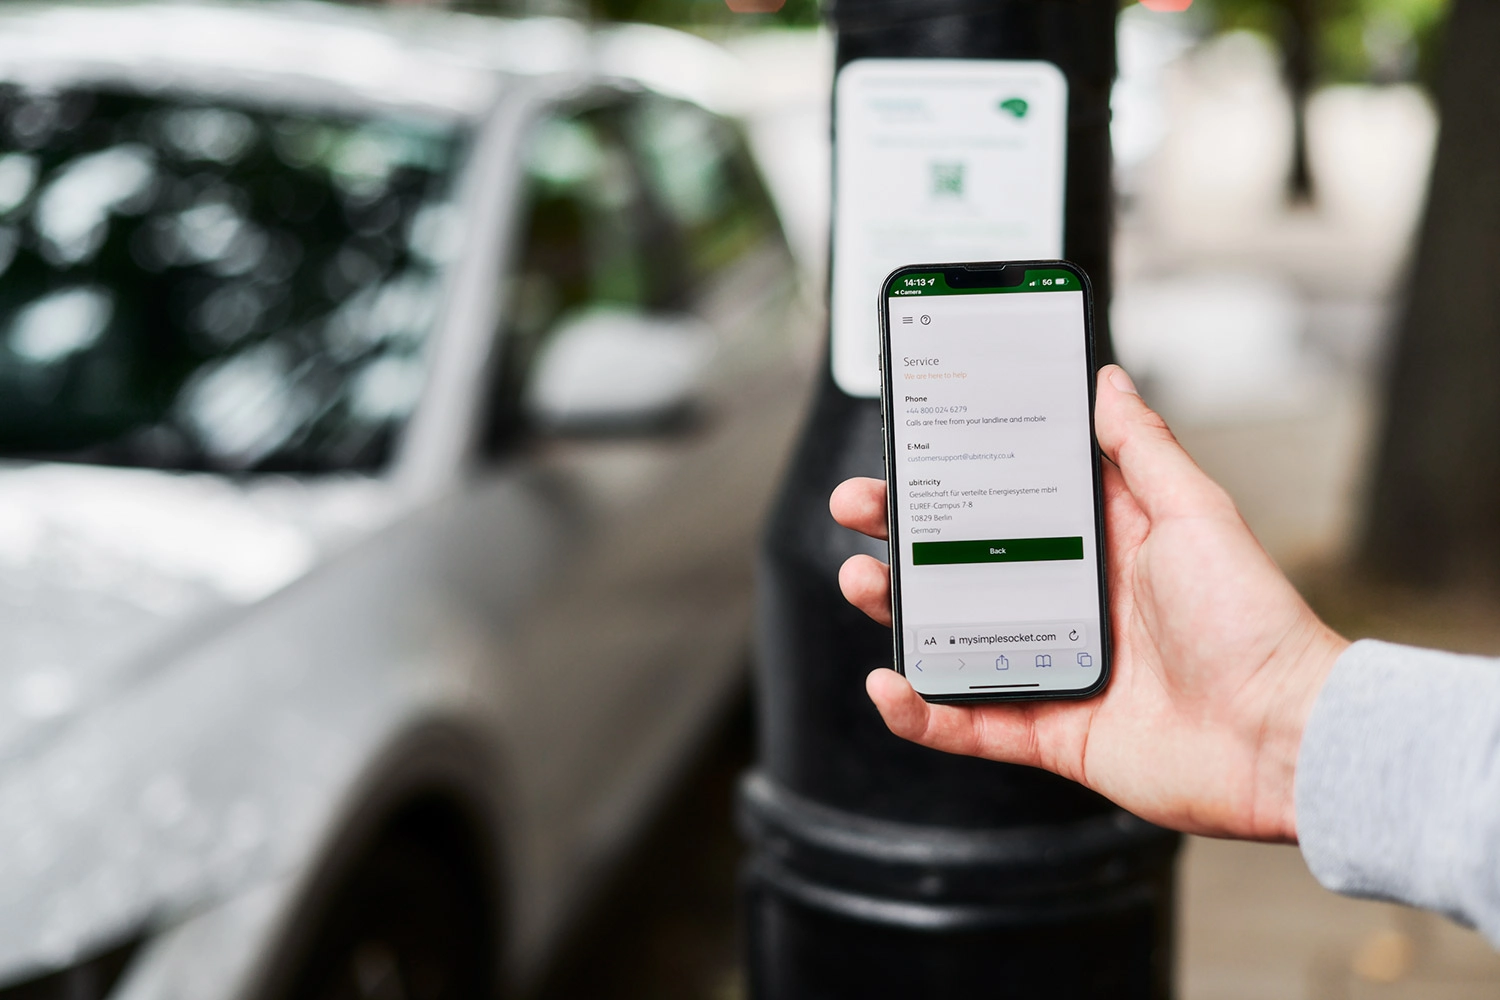 An EV driver is looking at the customer support and contact details of ubitricity, while standing at one of the company's public charging station in London, UK.